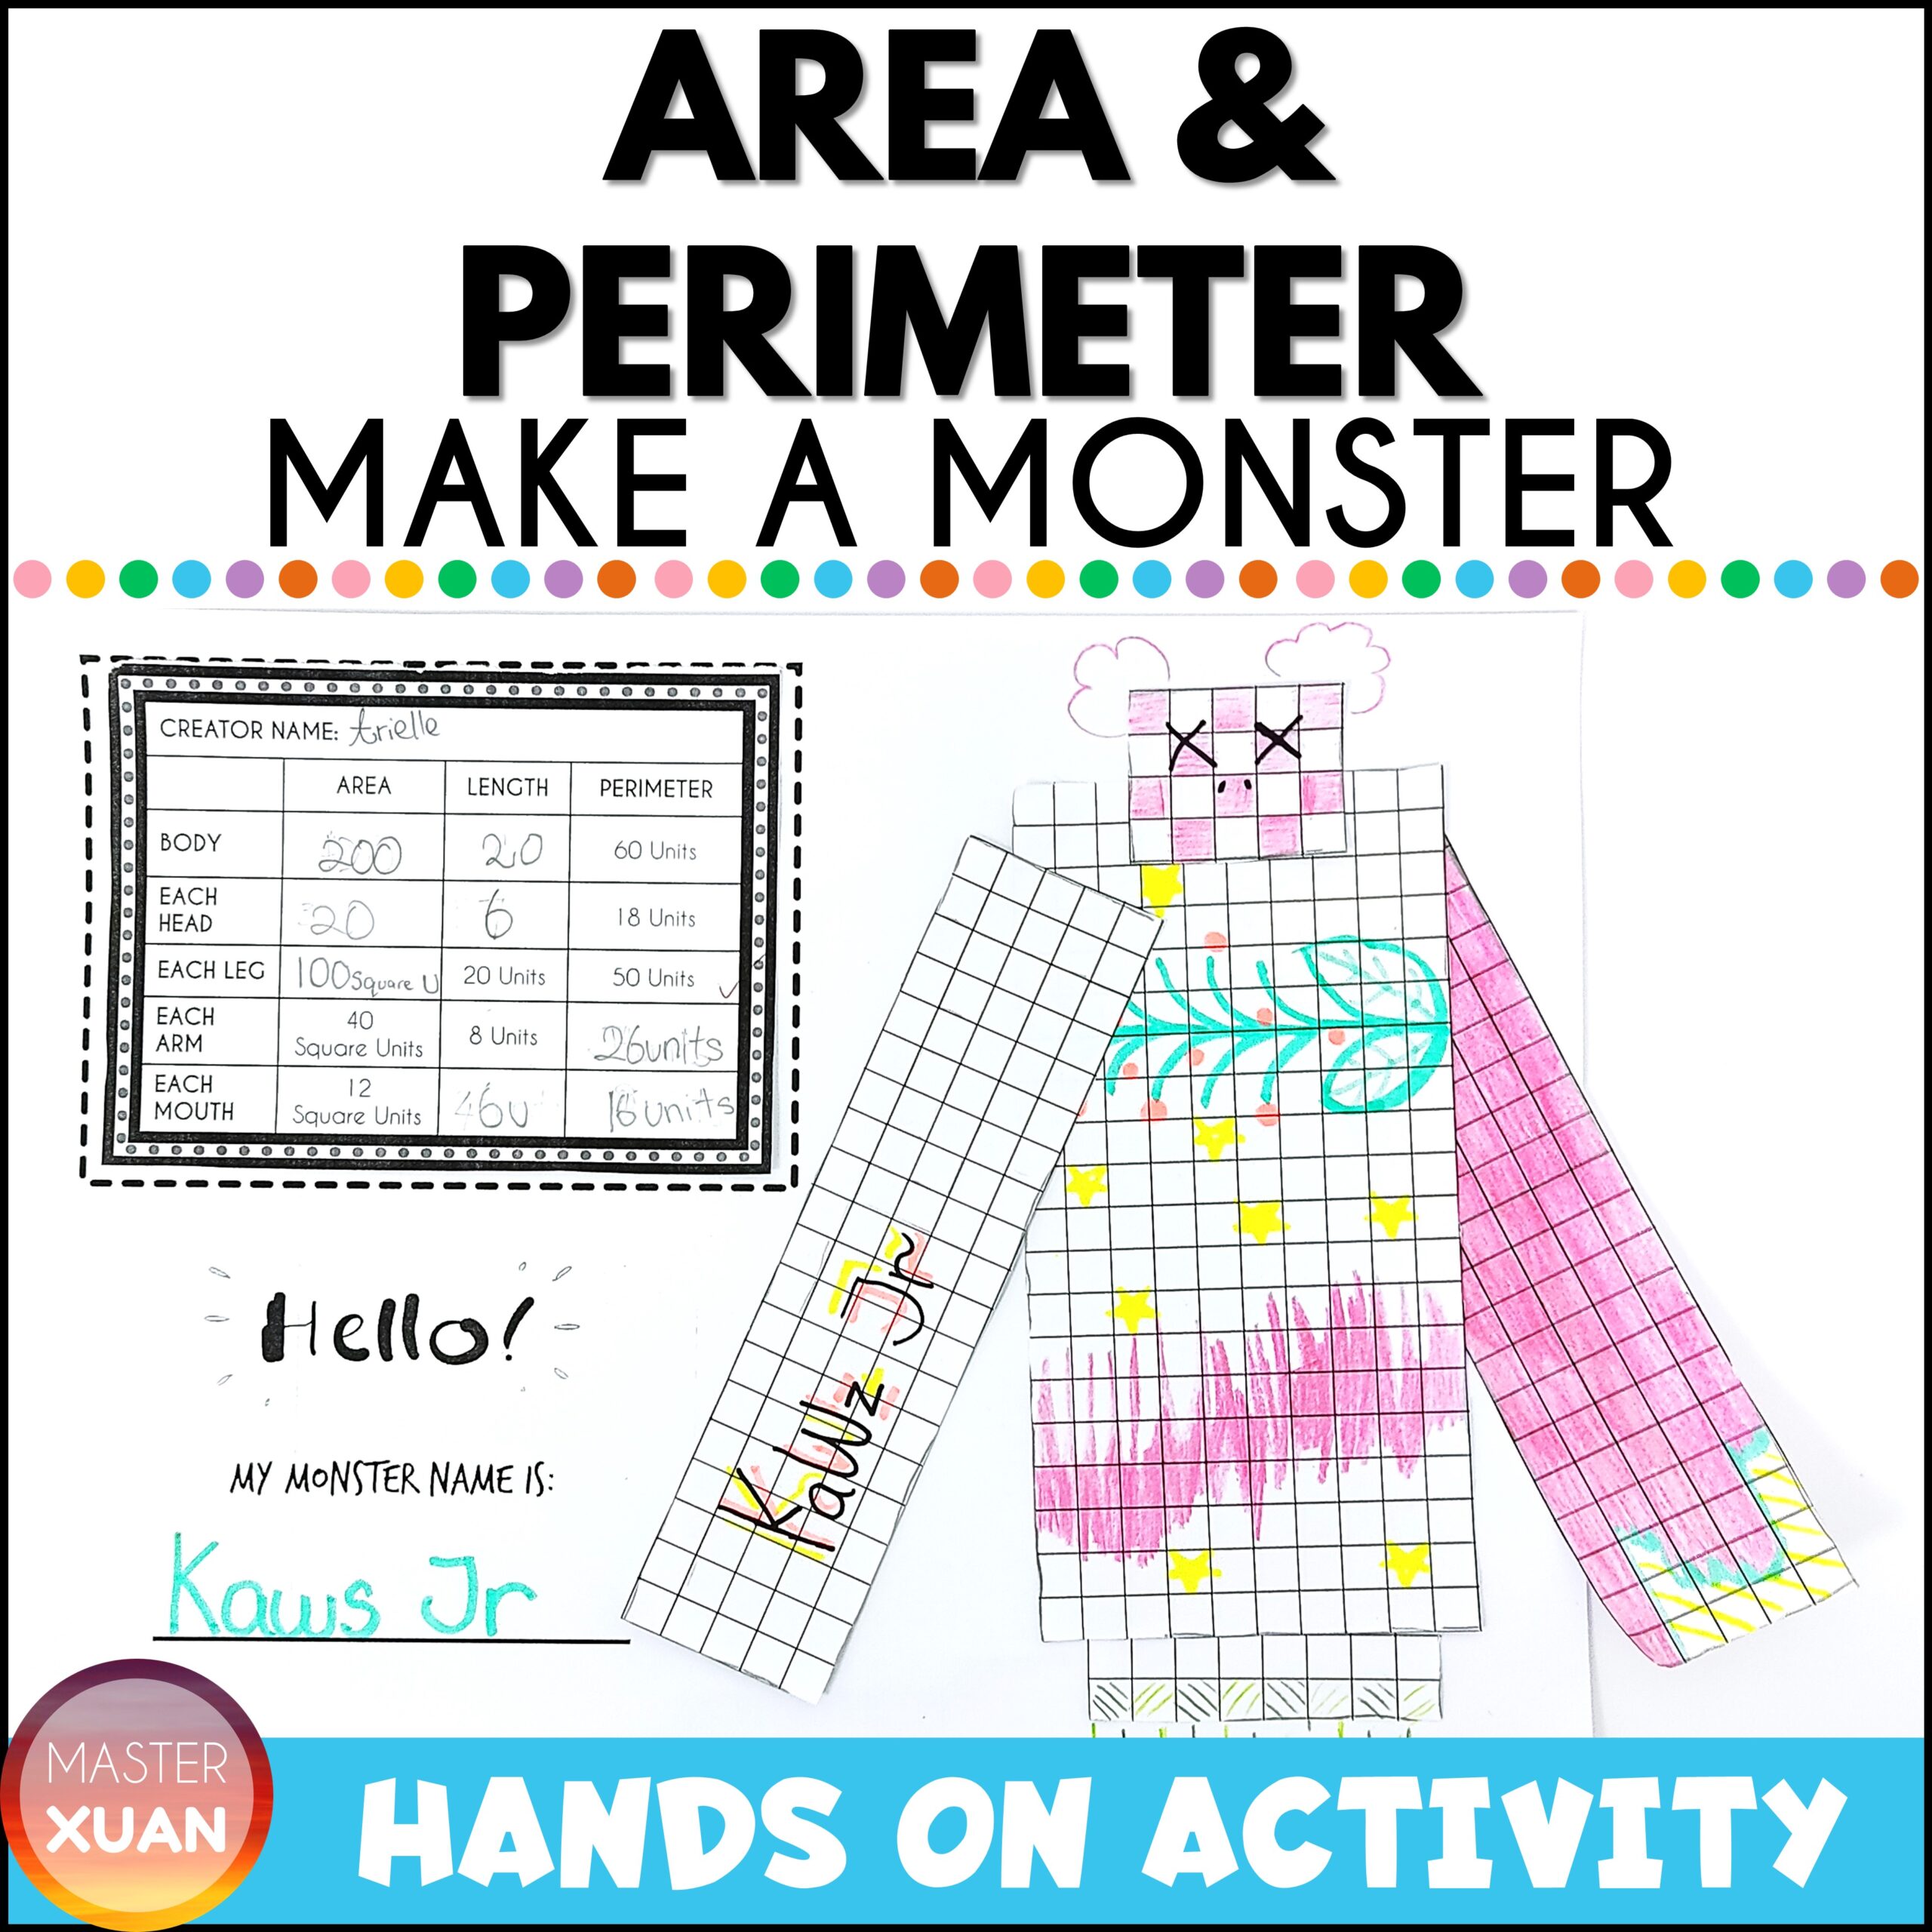 area and perimeter hands on activities allow students to make a monster.